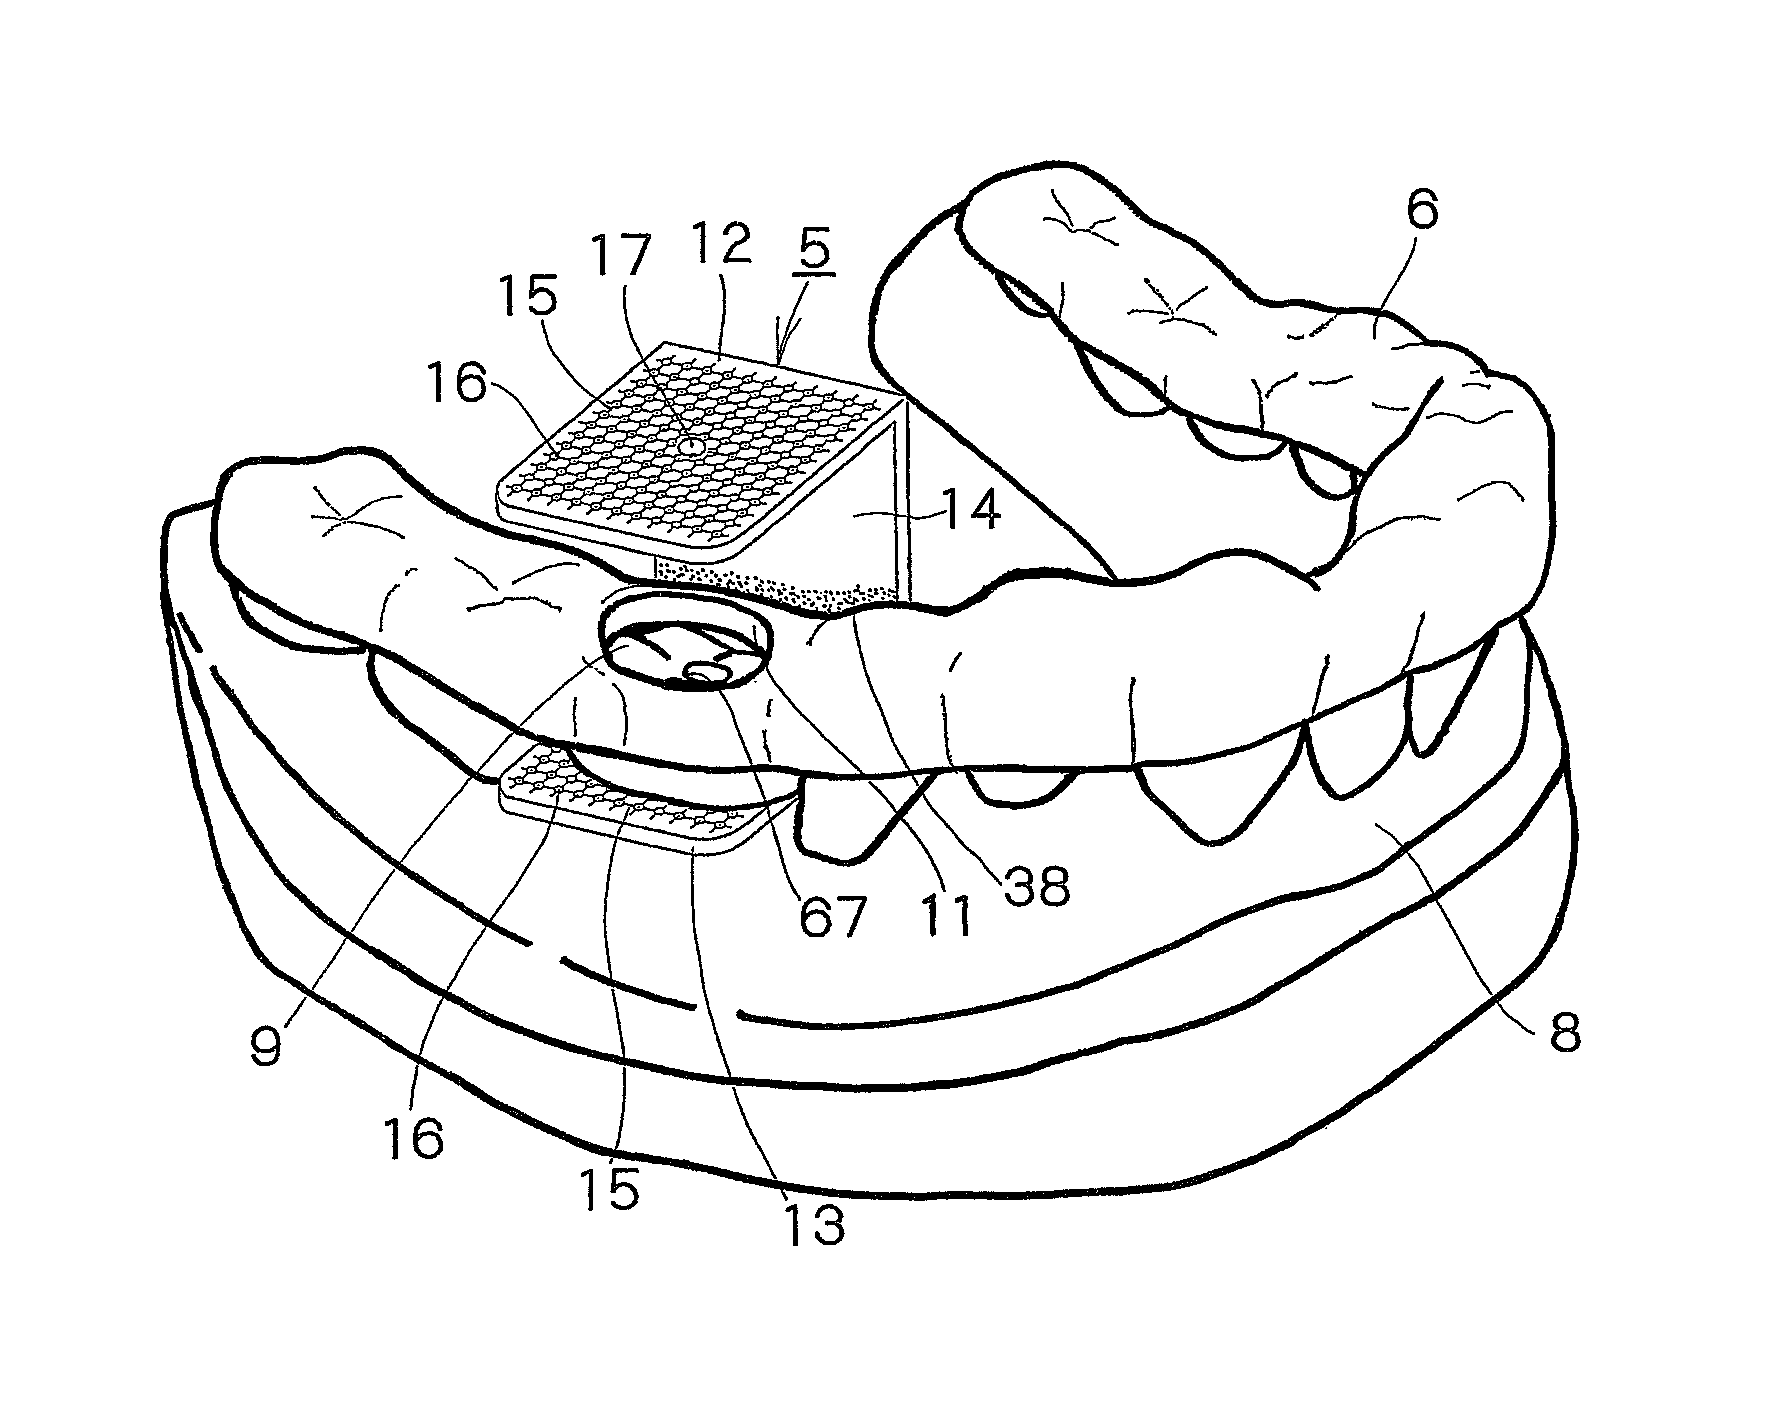 Surgical guide preparation tool and method for preparing surgical guide